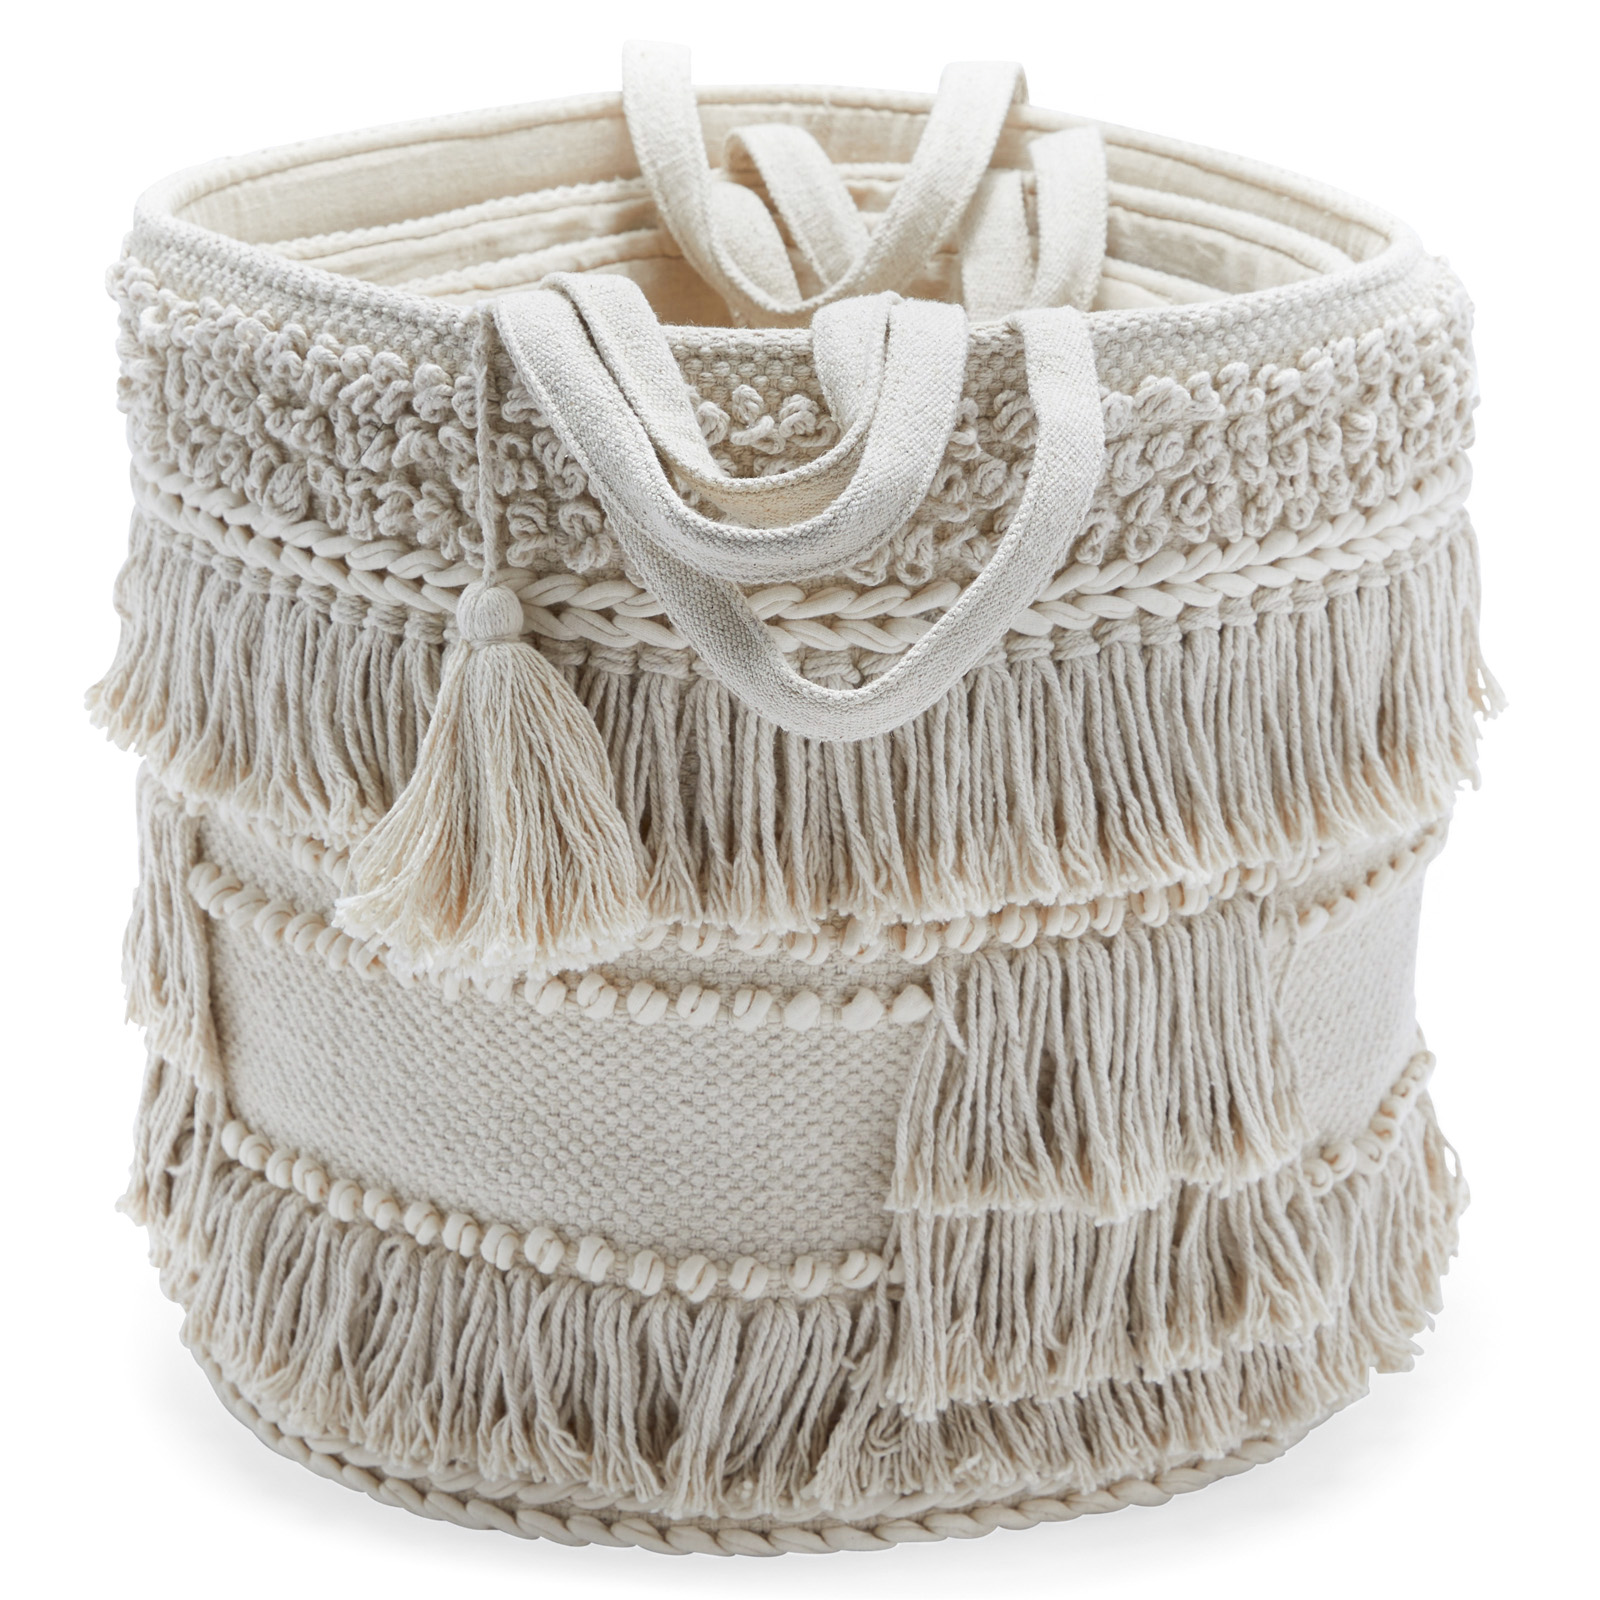 Hand Woven Macrame 3 Piece Basket Set, Natural by Drew Barrymore Flower Home - image 4 of 8